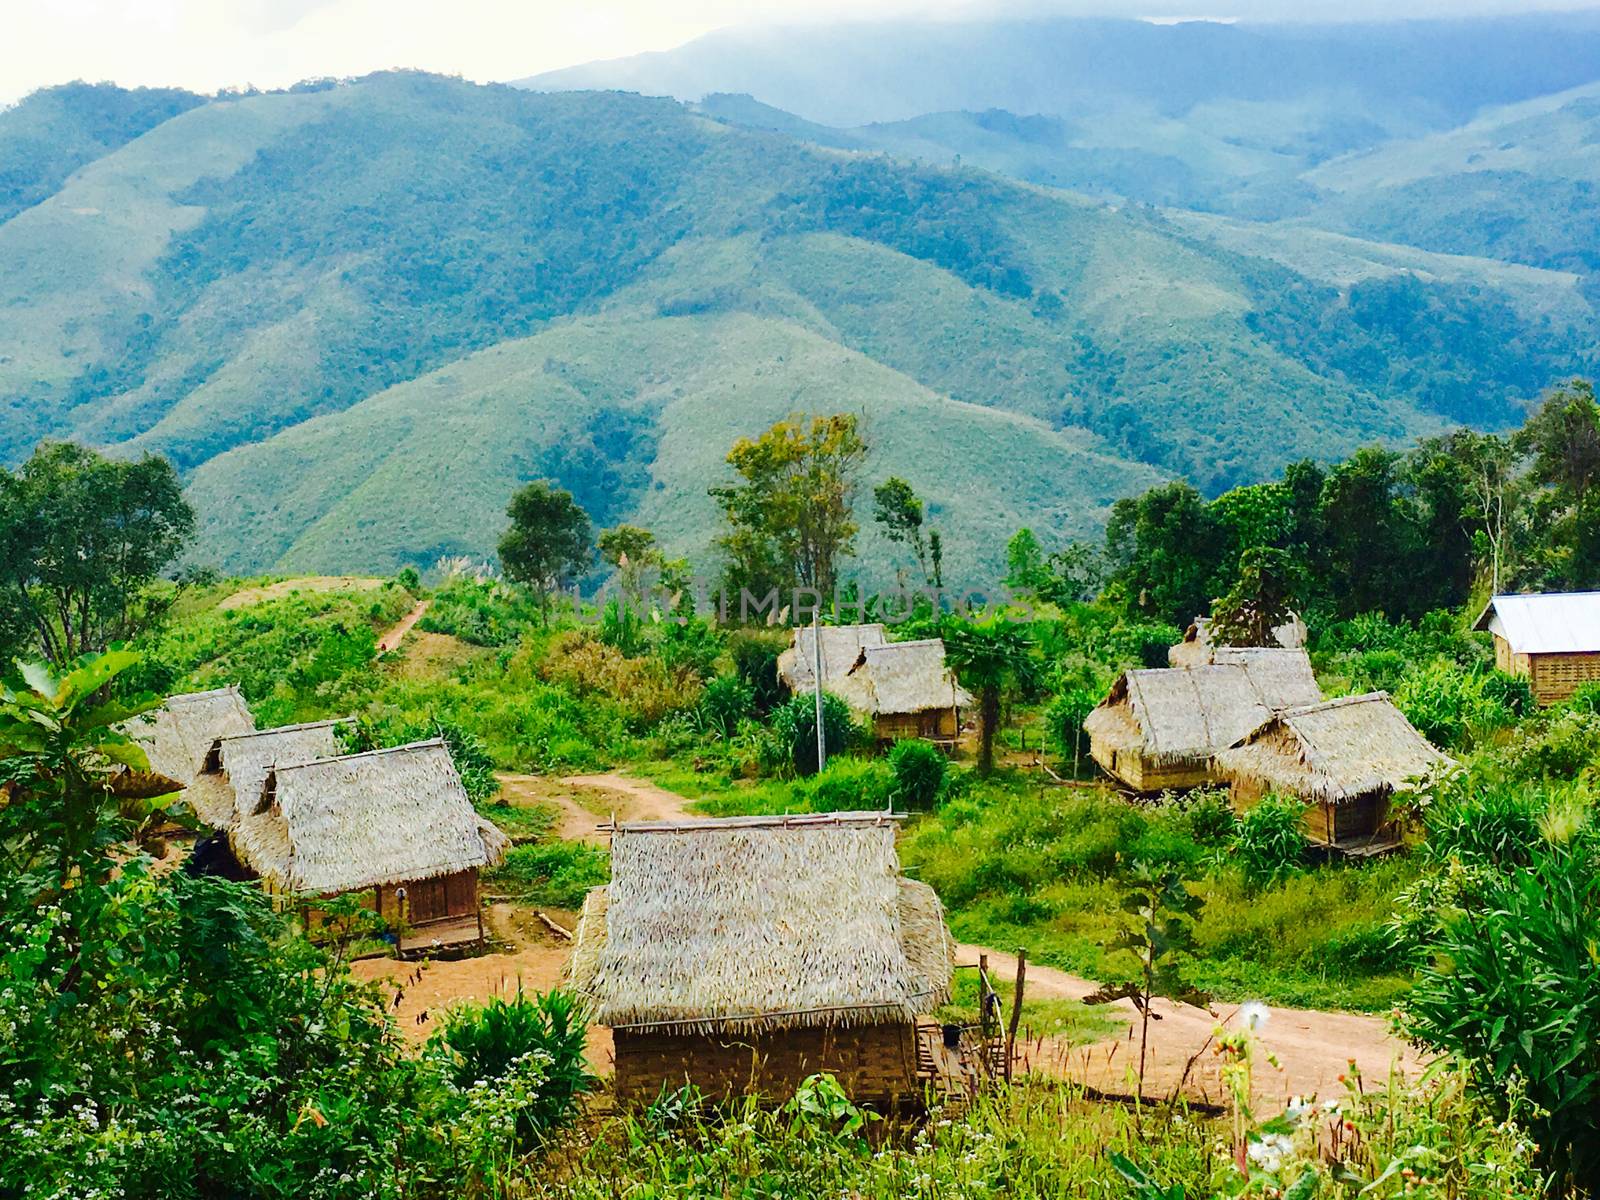 Viewpoints Local rural houses with mountains background in laos, asia